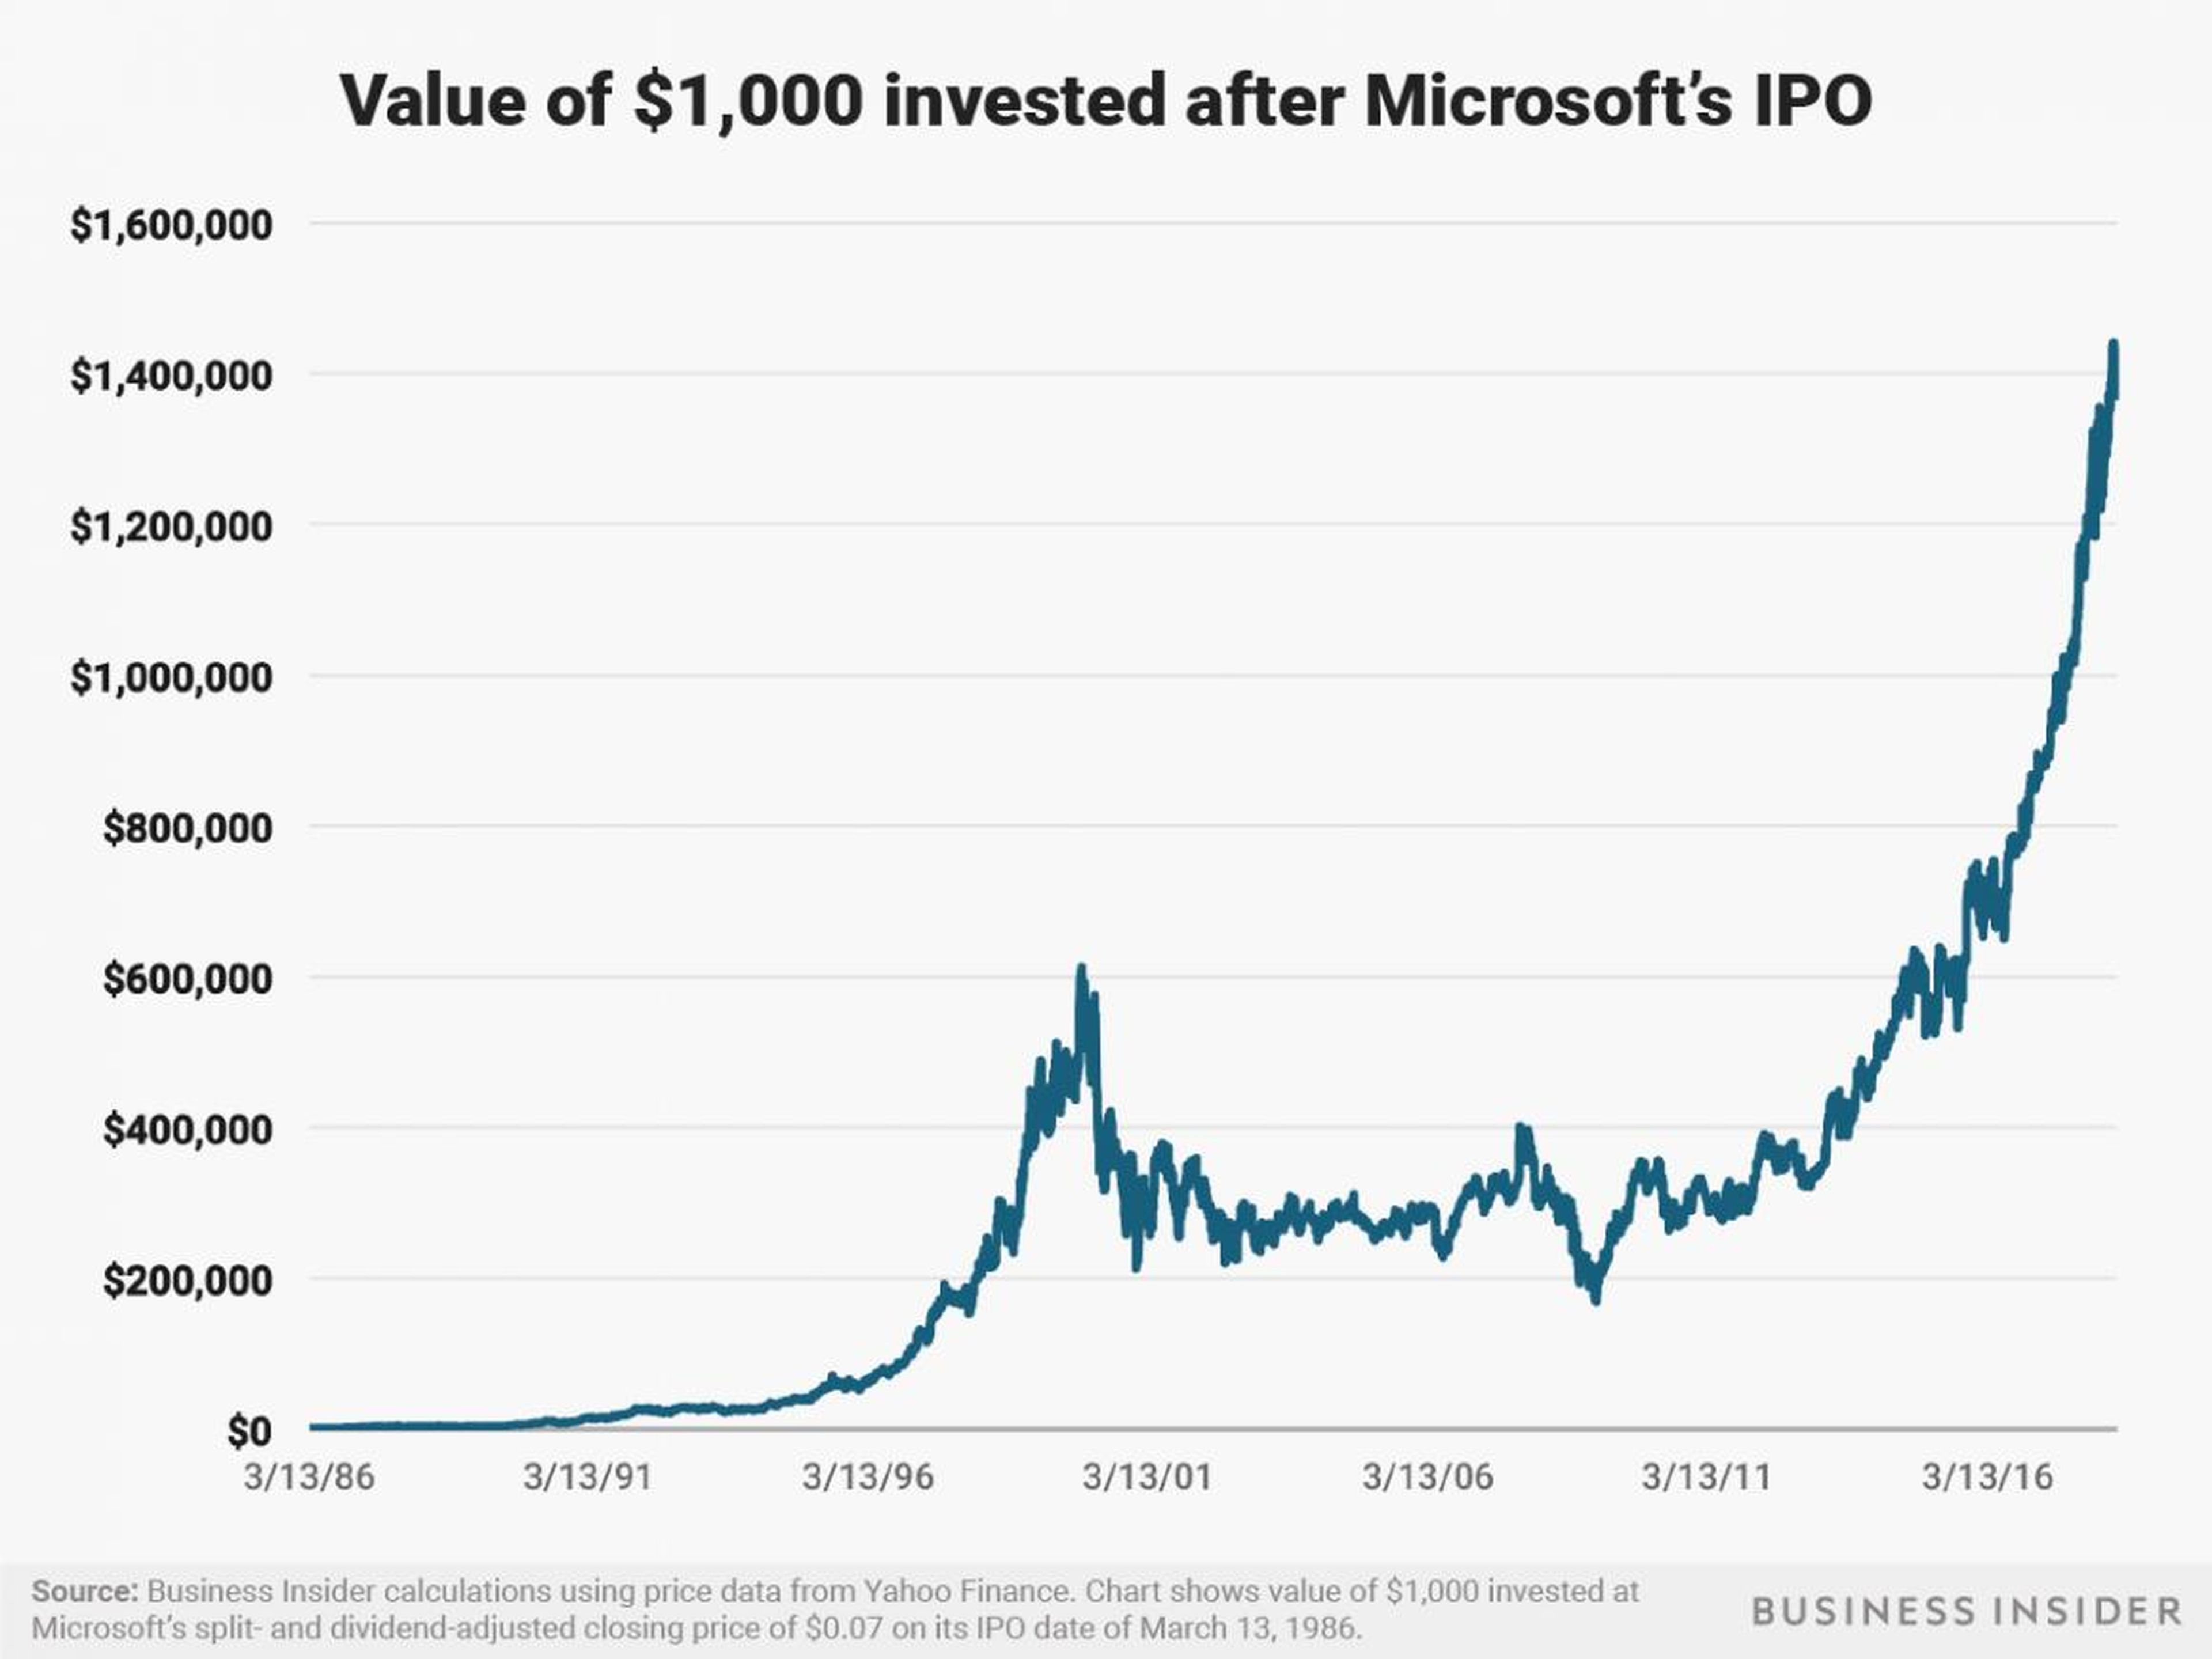 An investment of $1,000 in Microsoft after its IPO on March 13, 1986 would be worth around $1.4 million today.